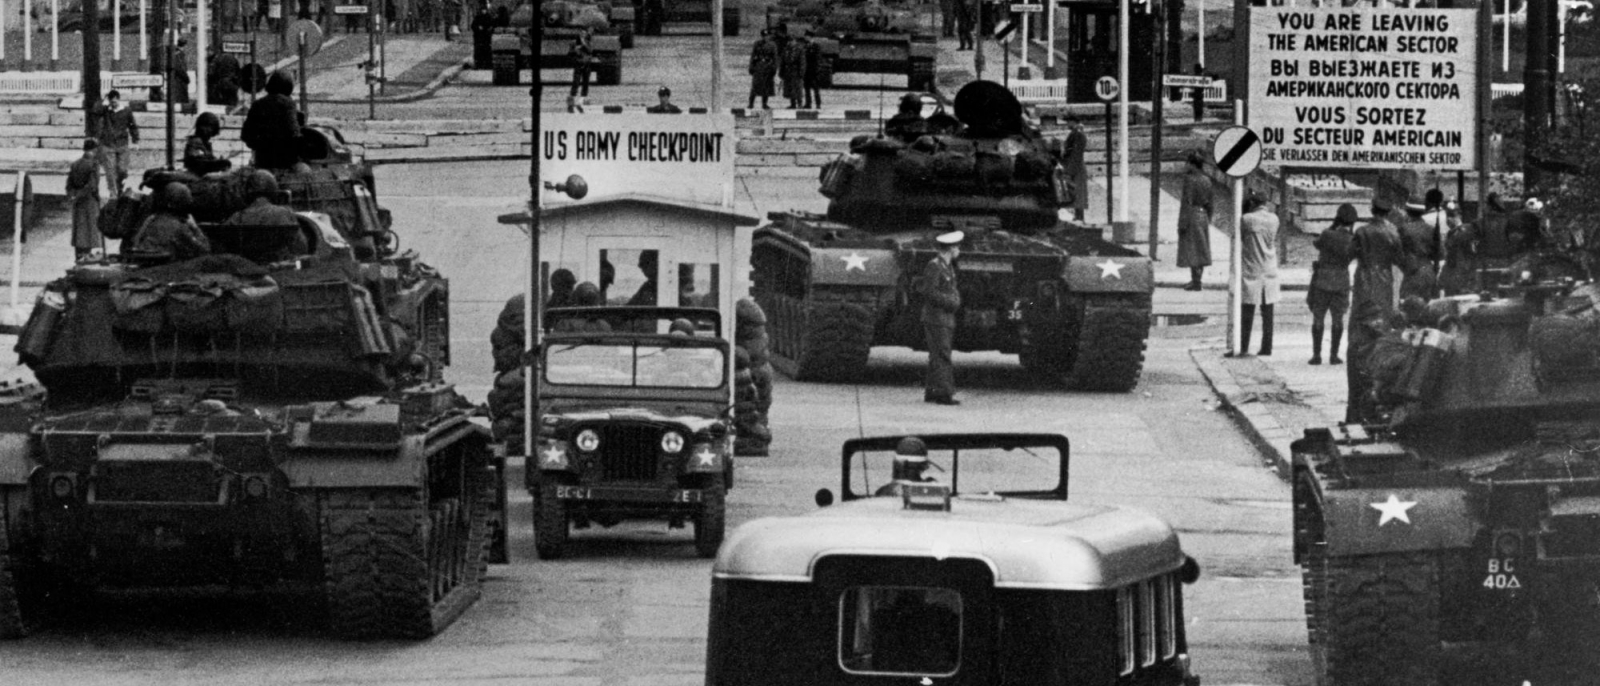 Three US tanks in front of the sign marking the sector border, with several Soviet tanks in the background on GDR territory.